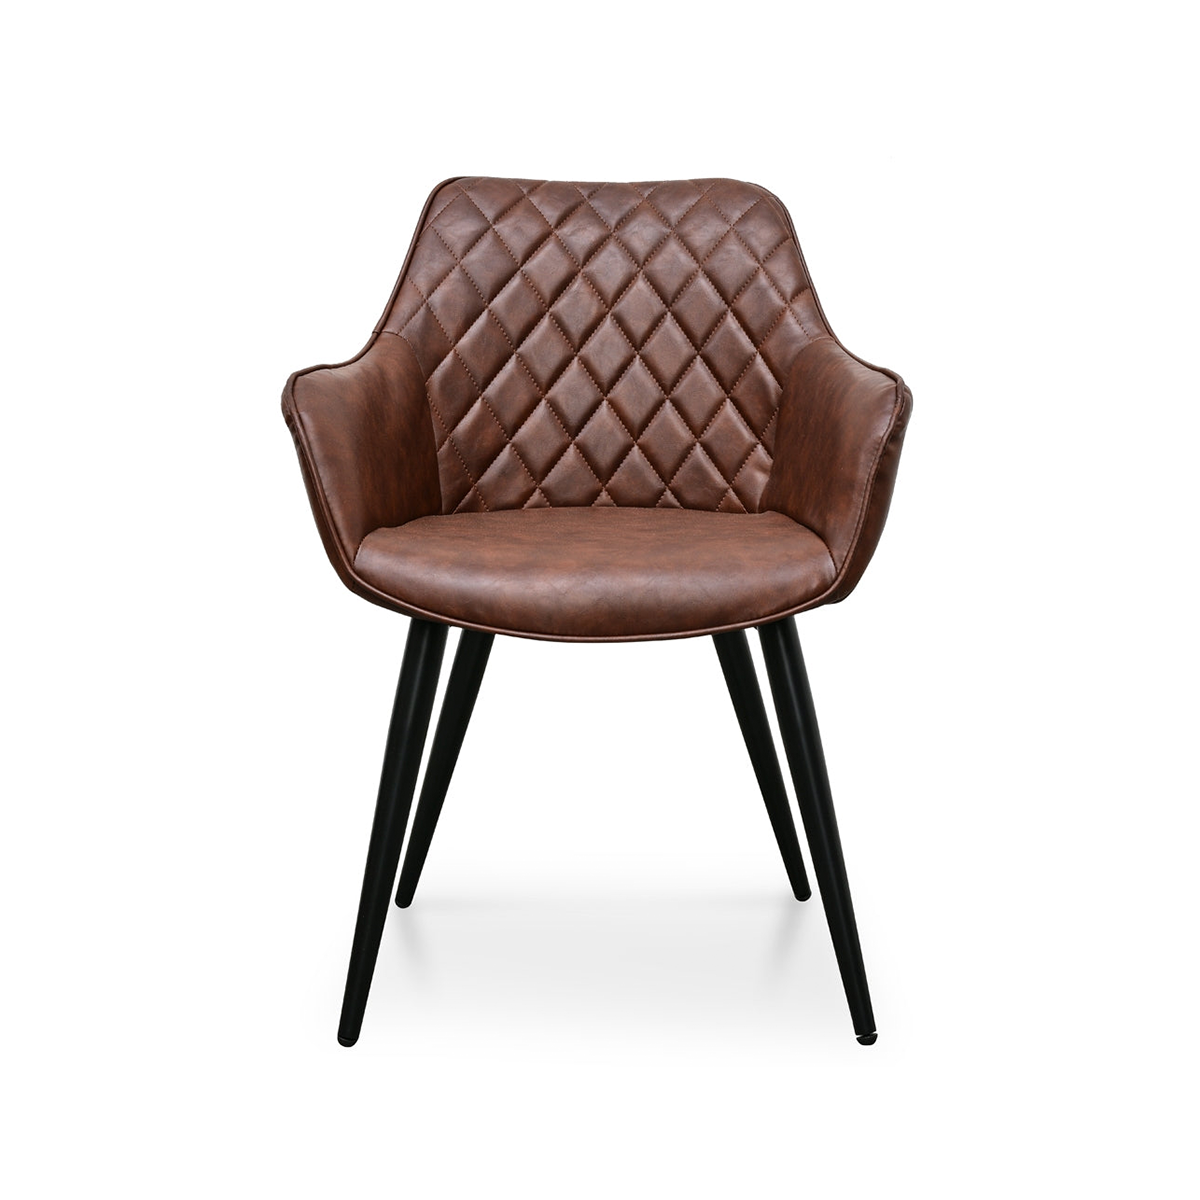 FondHouse Fenzo Plywood Dining Chair  - Cinnamon Brown